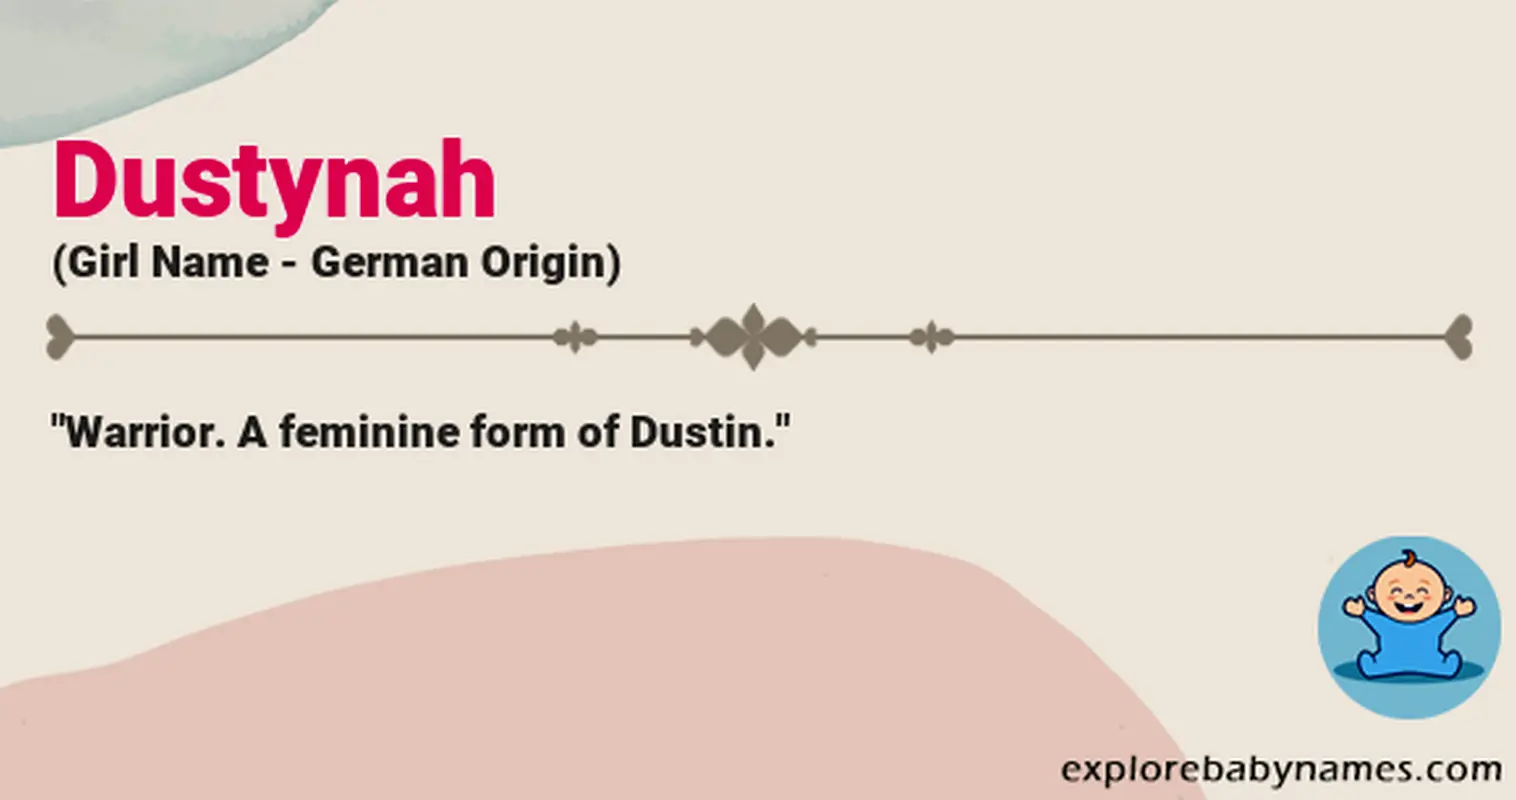 Meaning of Dustynah